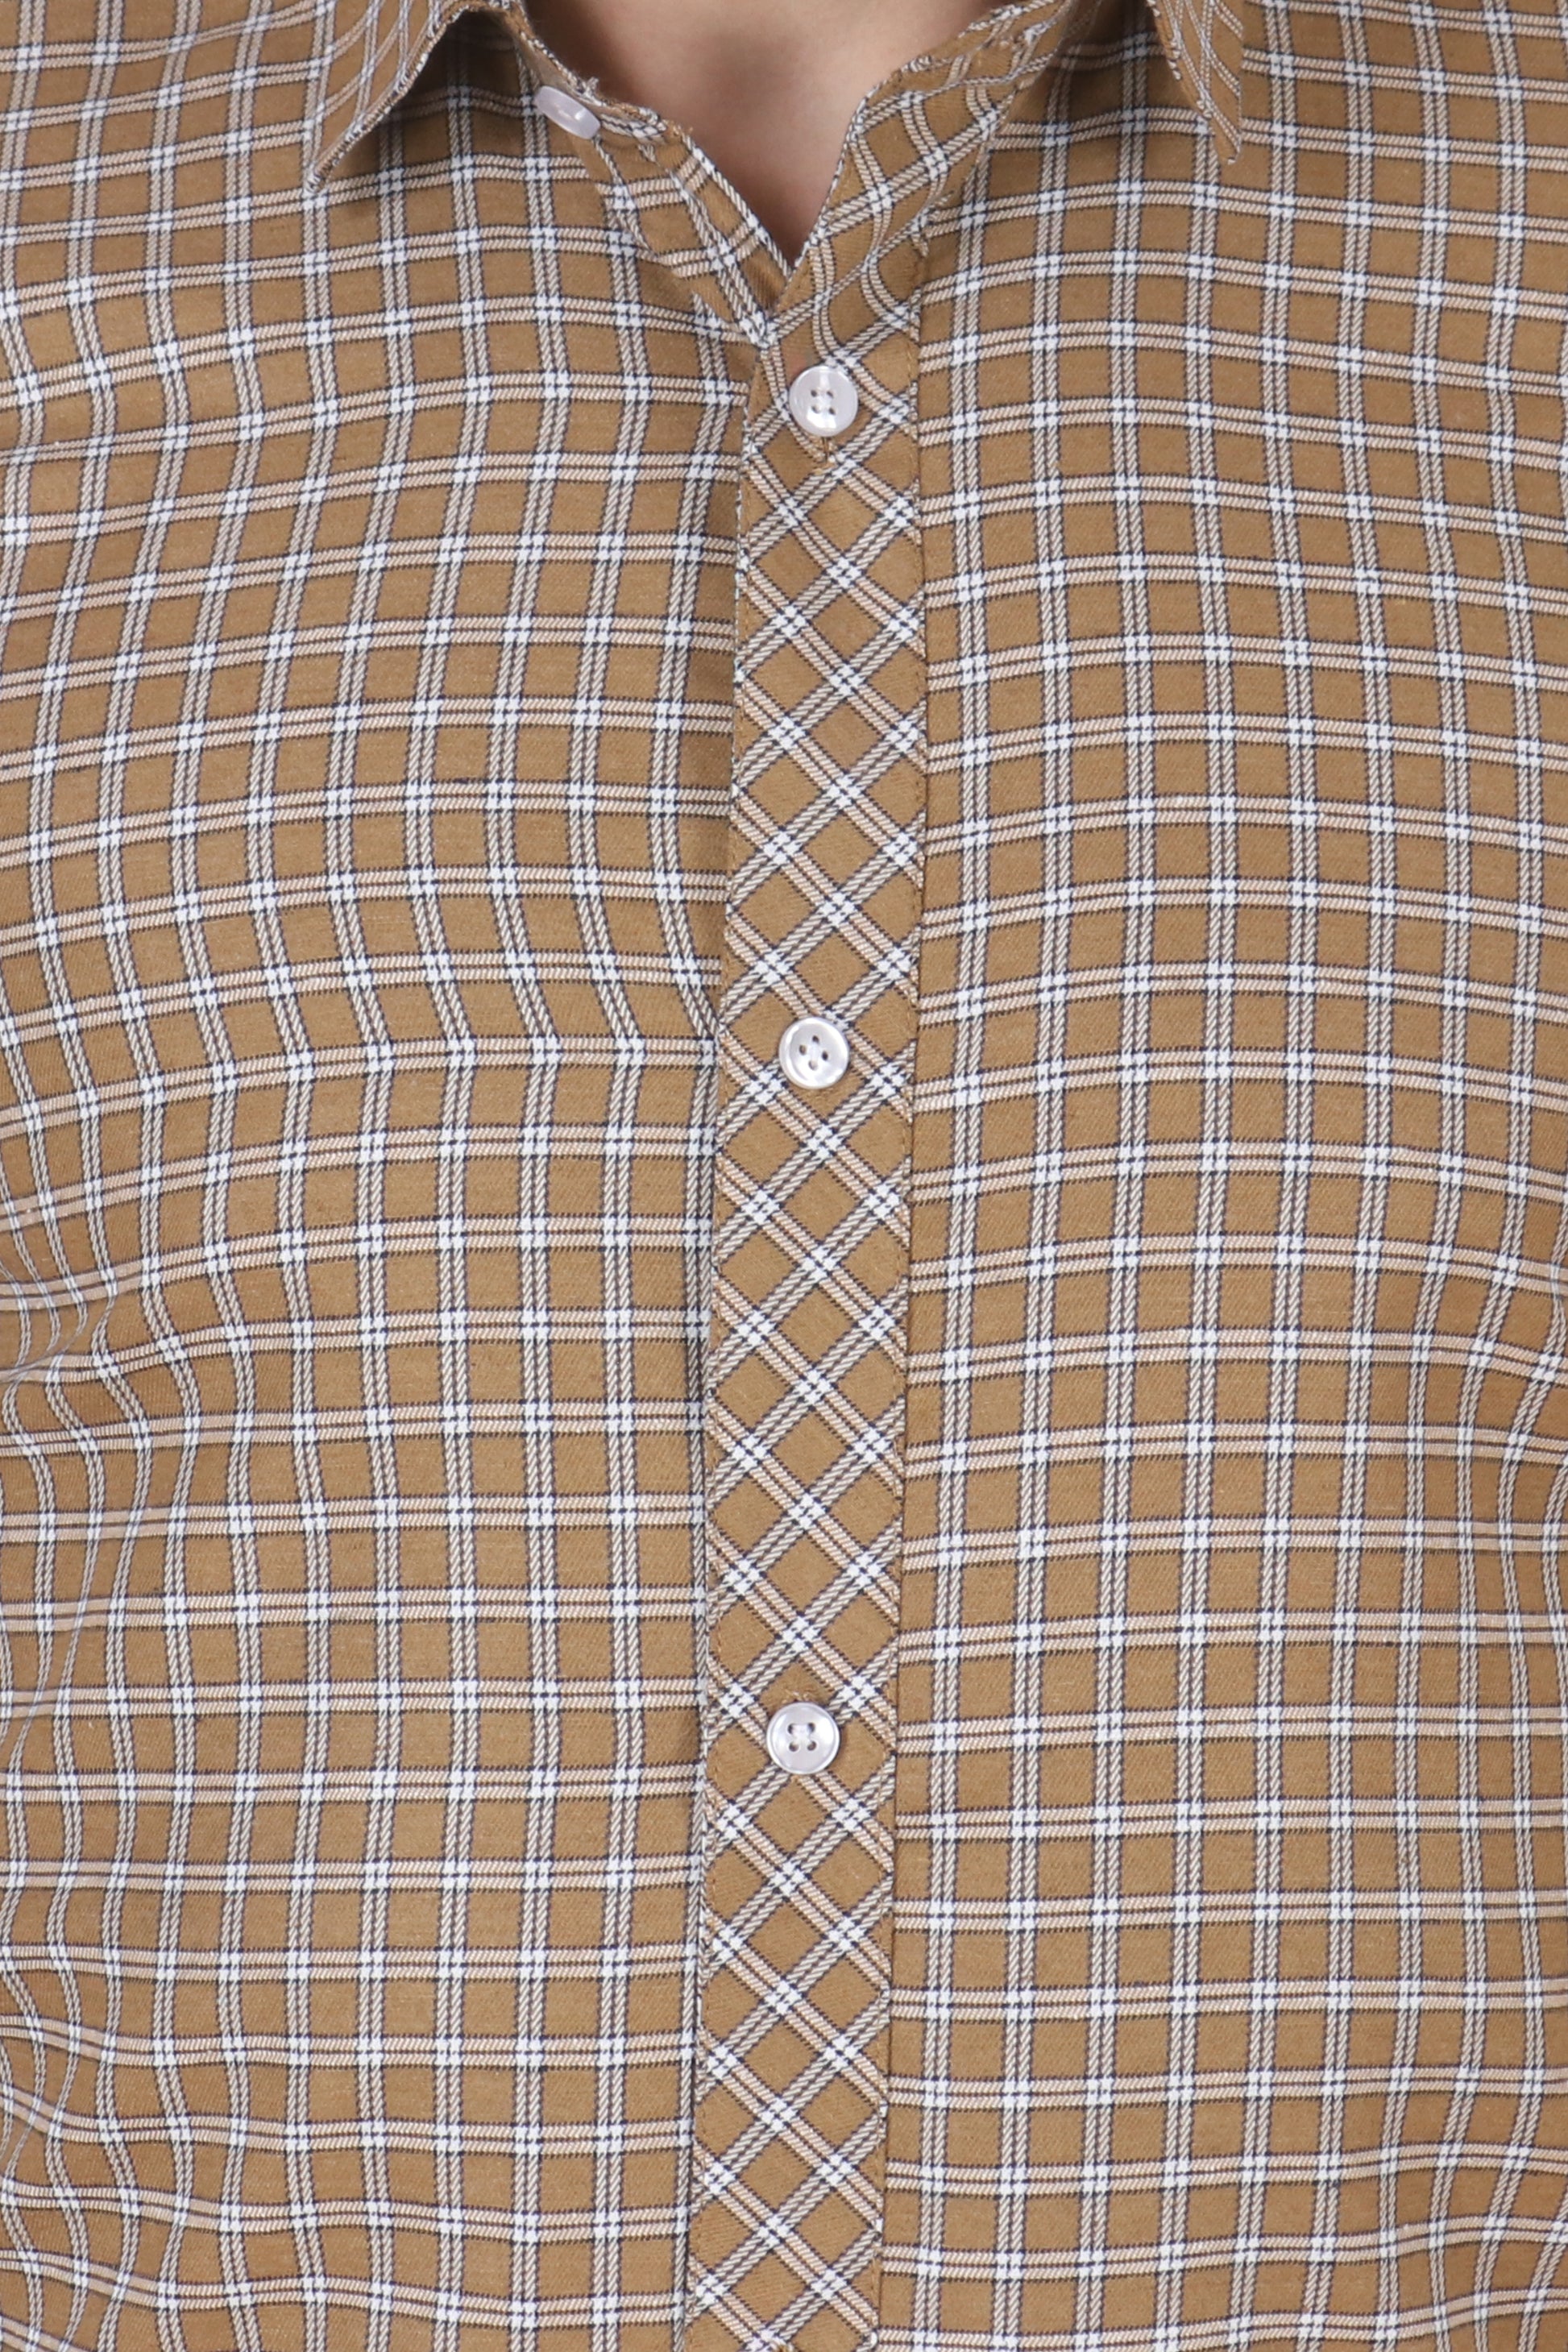 All Size, Brown Cotton Shirt, Caramel Checked Shirt, Caramel Checked Woollen Shirt, Checked Shirt, Collar Neckline, Cotton Checked Shirt, Cotton Shirt, Cotton Twill, Full Sleeves, Light Brown